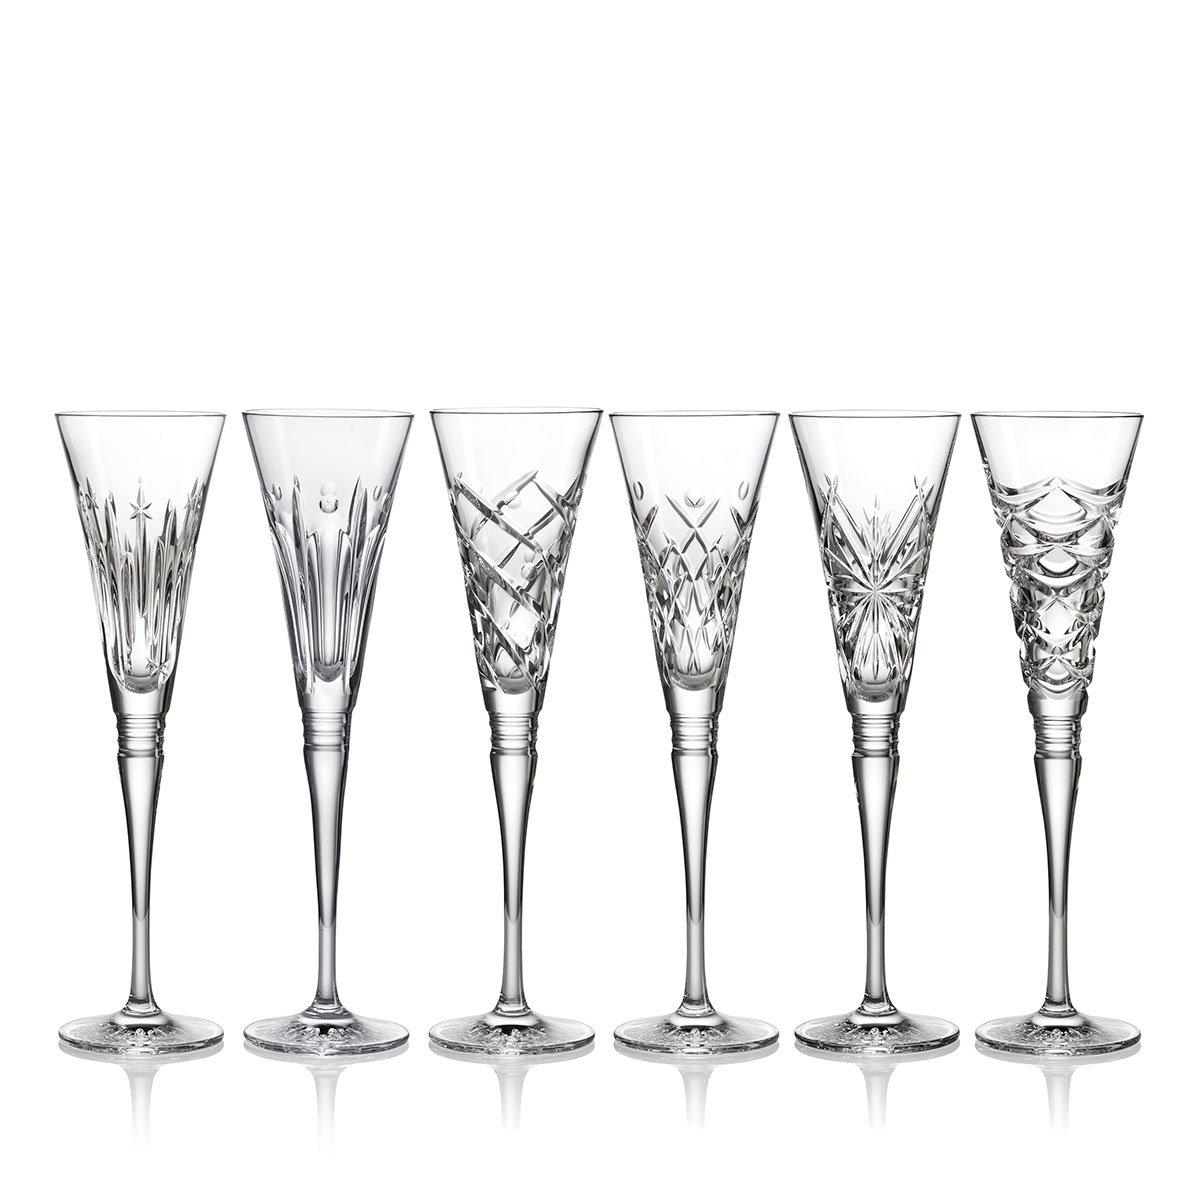 Waterford Winter Wonders Flute Set of 6 Glasses Mixed Patterns